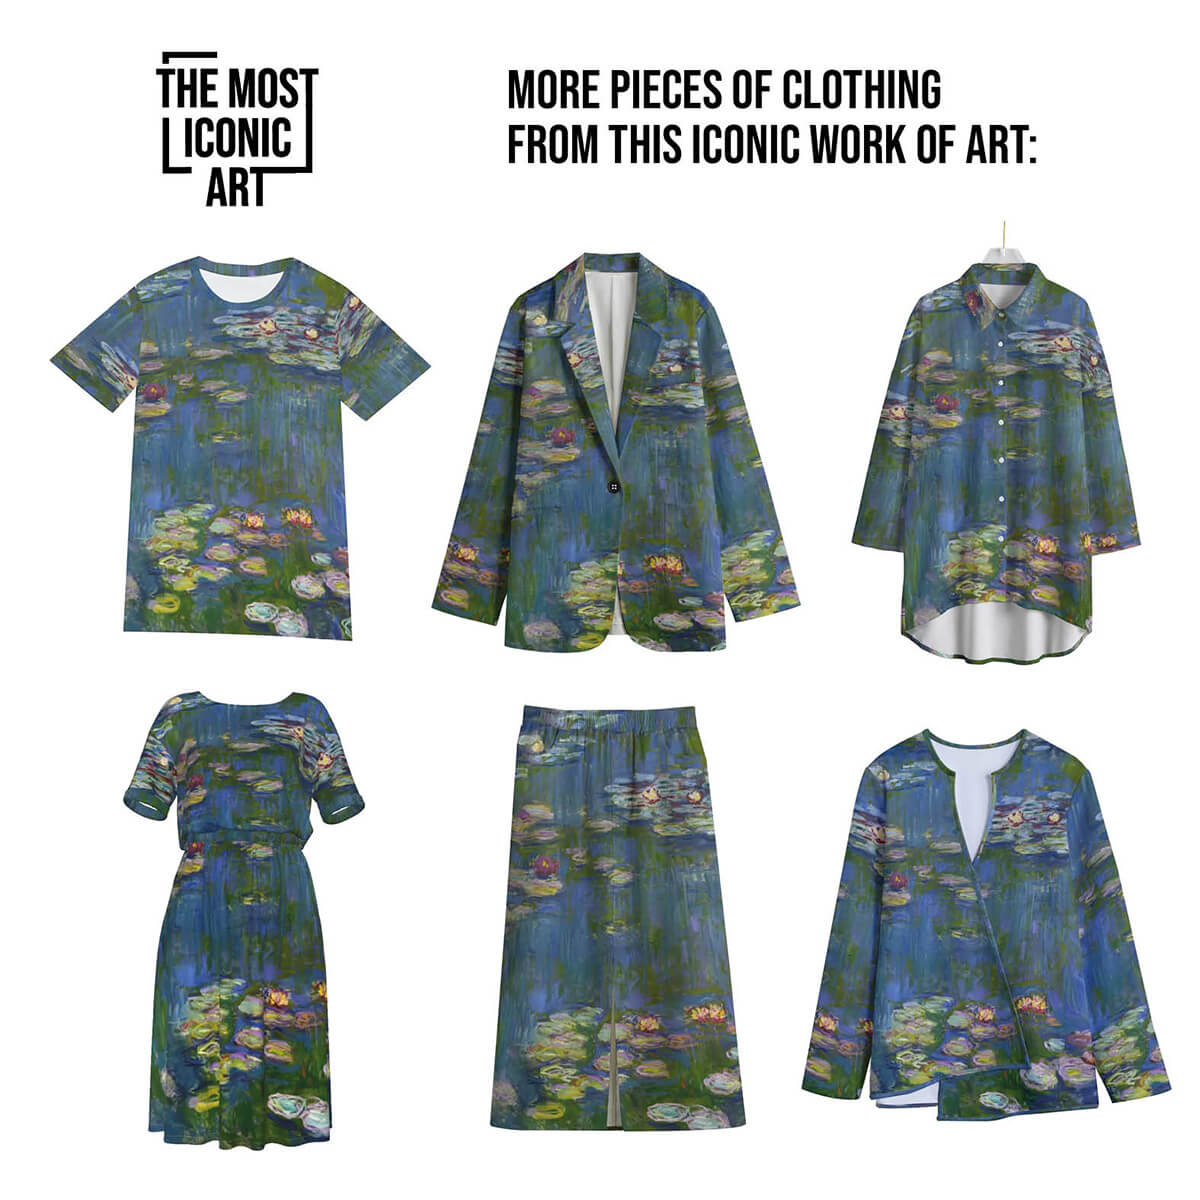 Soft and comfortable fabric with a unique lily pond print